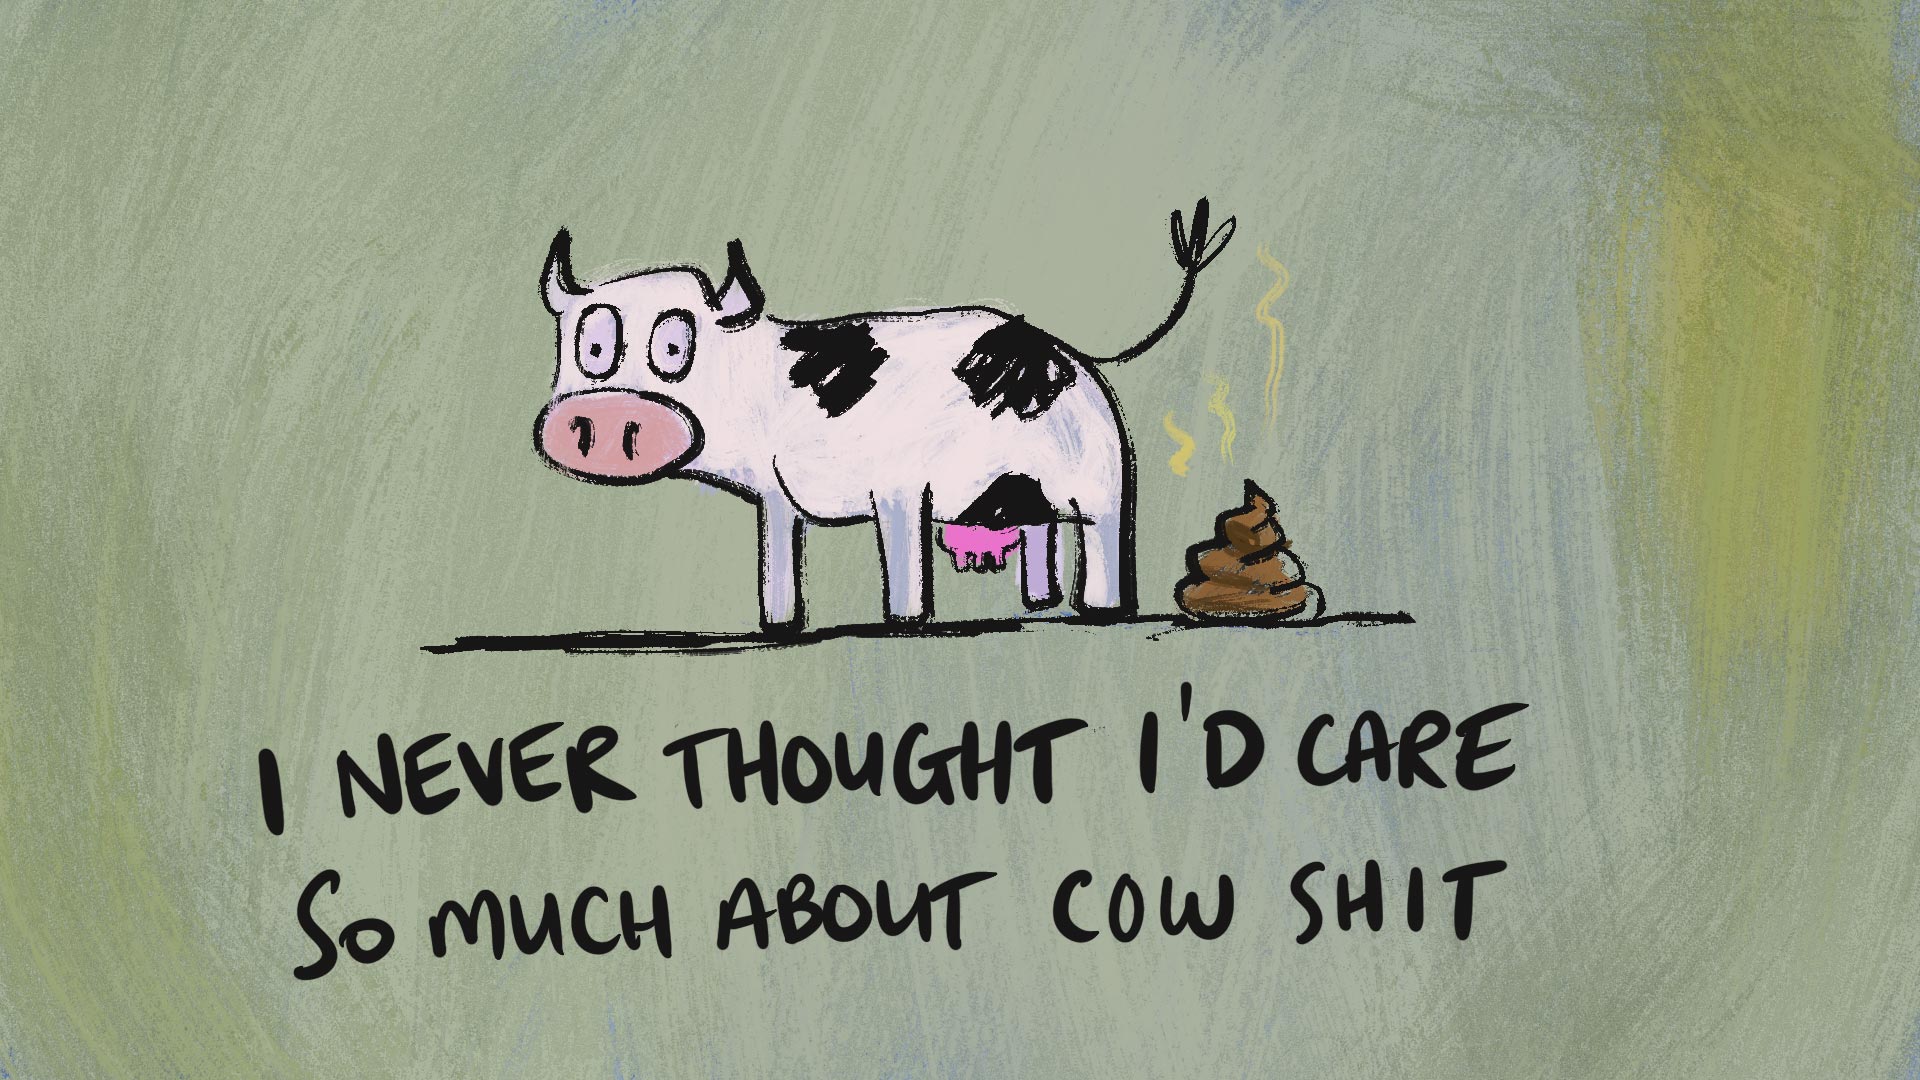 An image of a cartoon cow doing a poo with the words I never thought I'd care so much about cow shit underneath